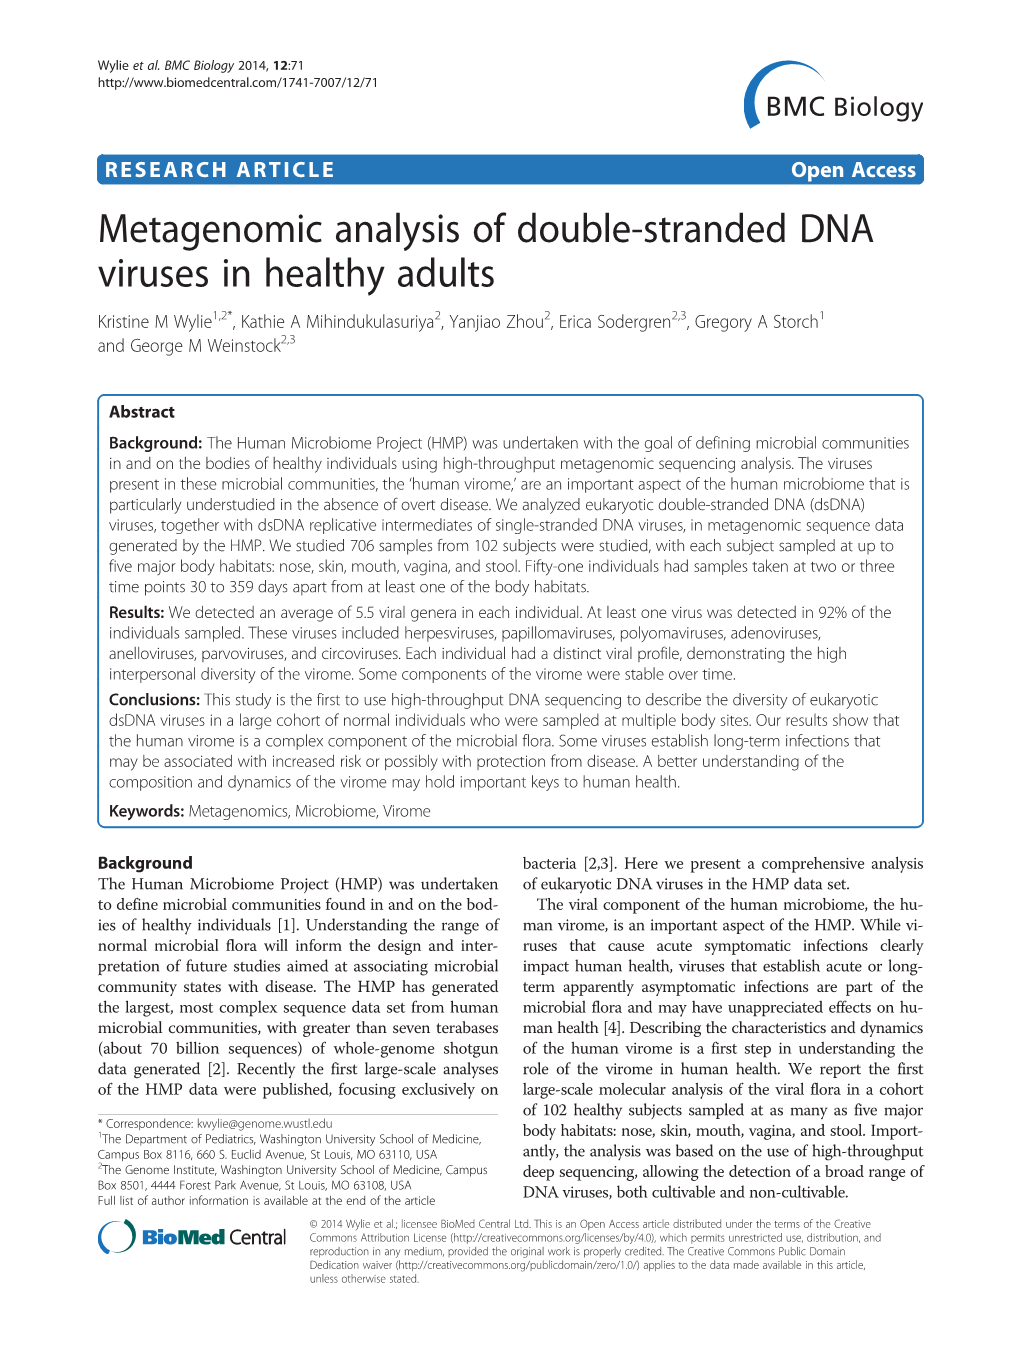 Metagenomic Analysis of Double-Stranded DNA Viruses in Healthy Adults